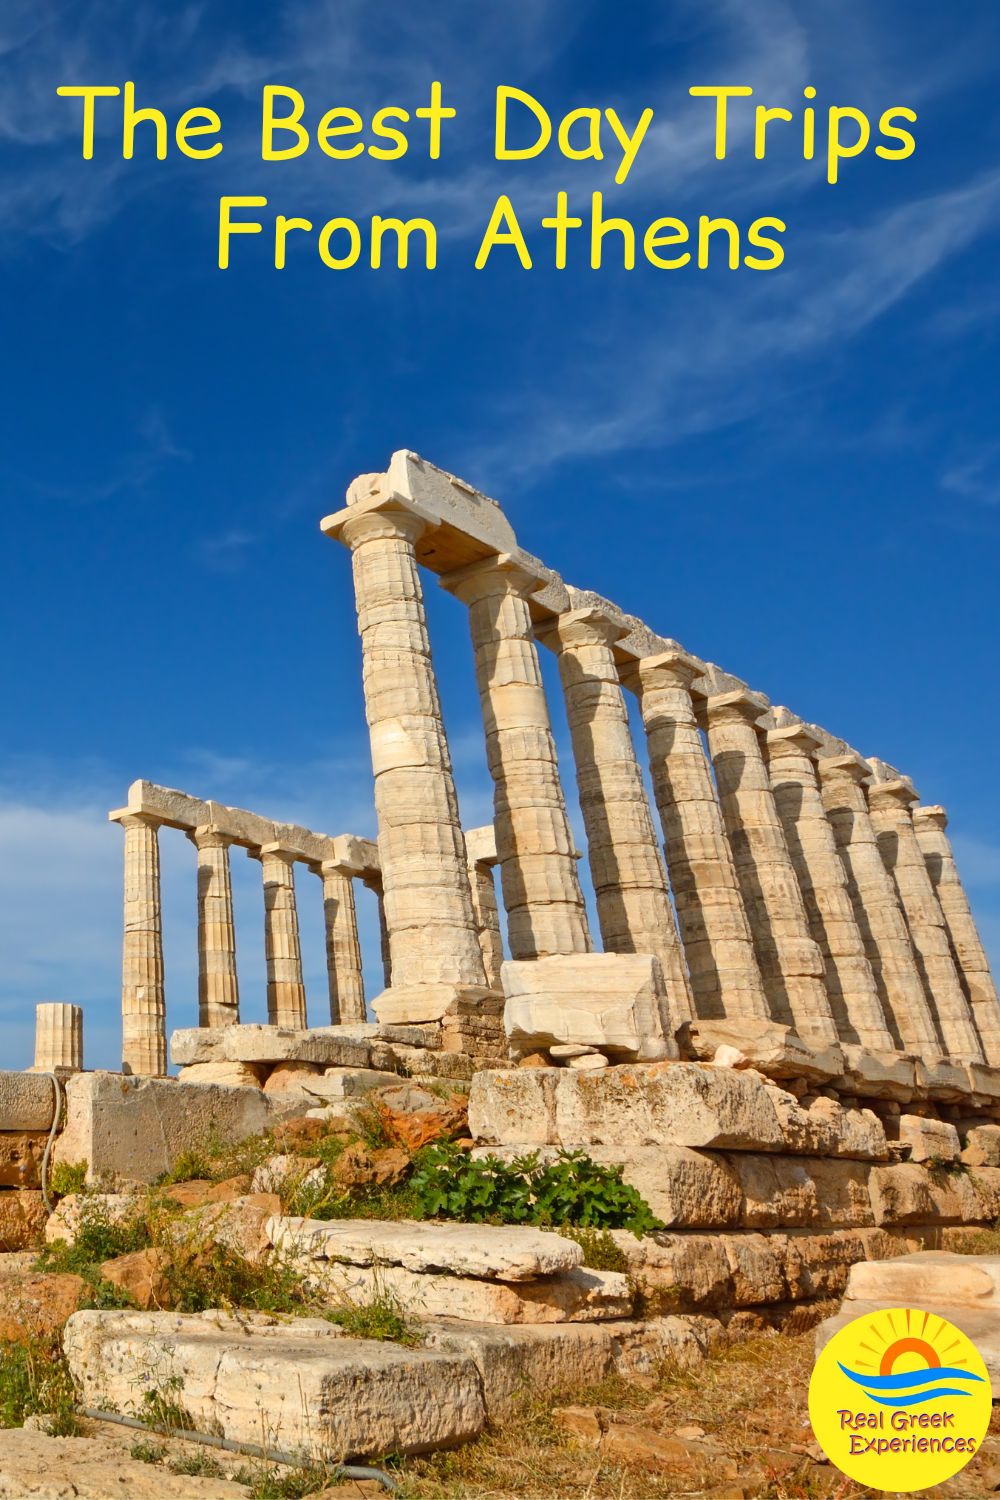 Popular day trips from Athens